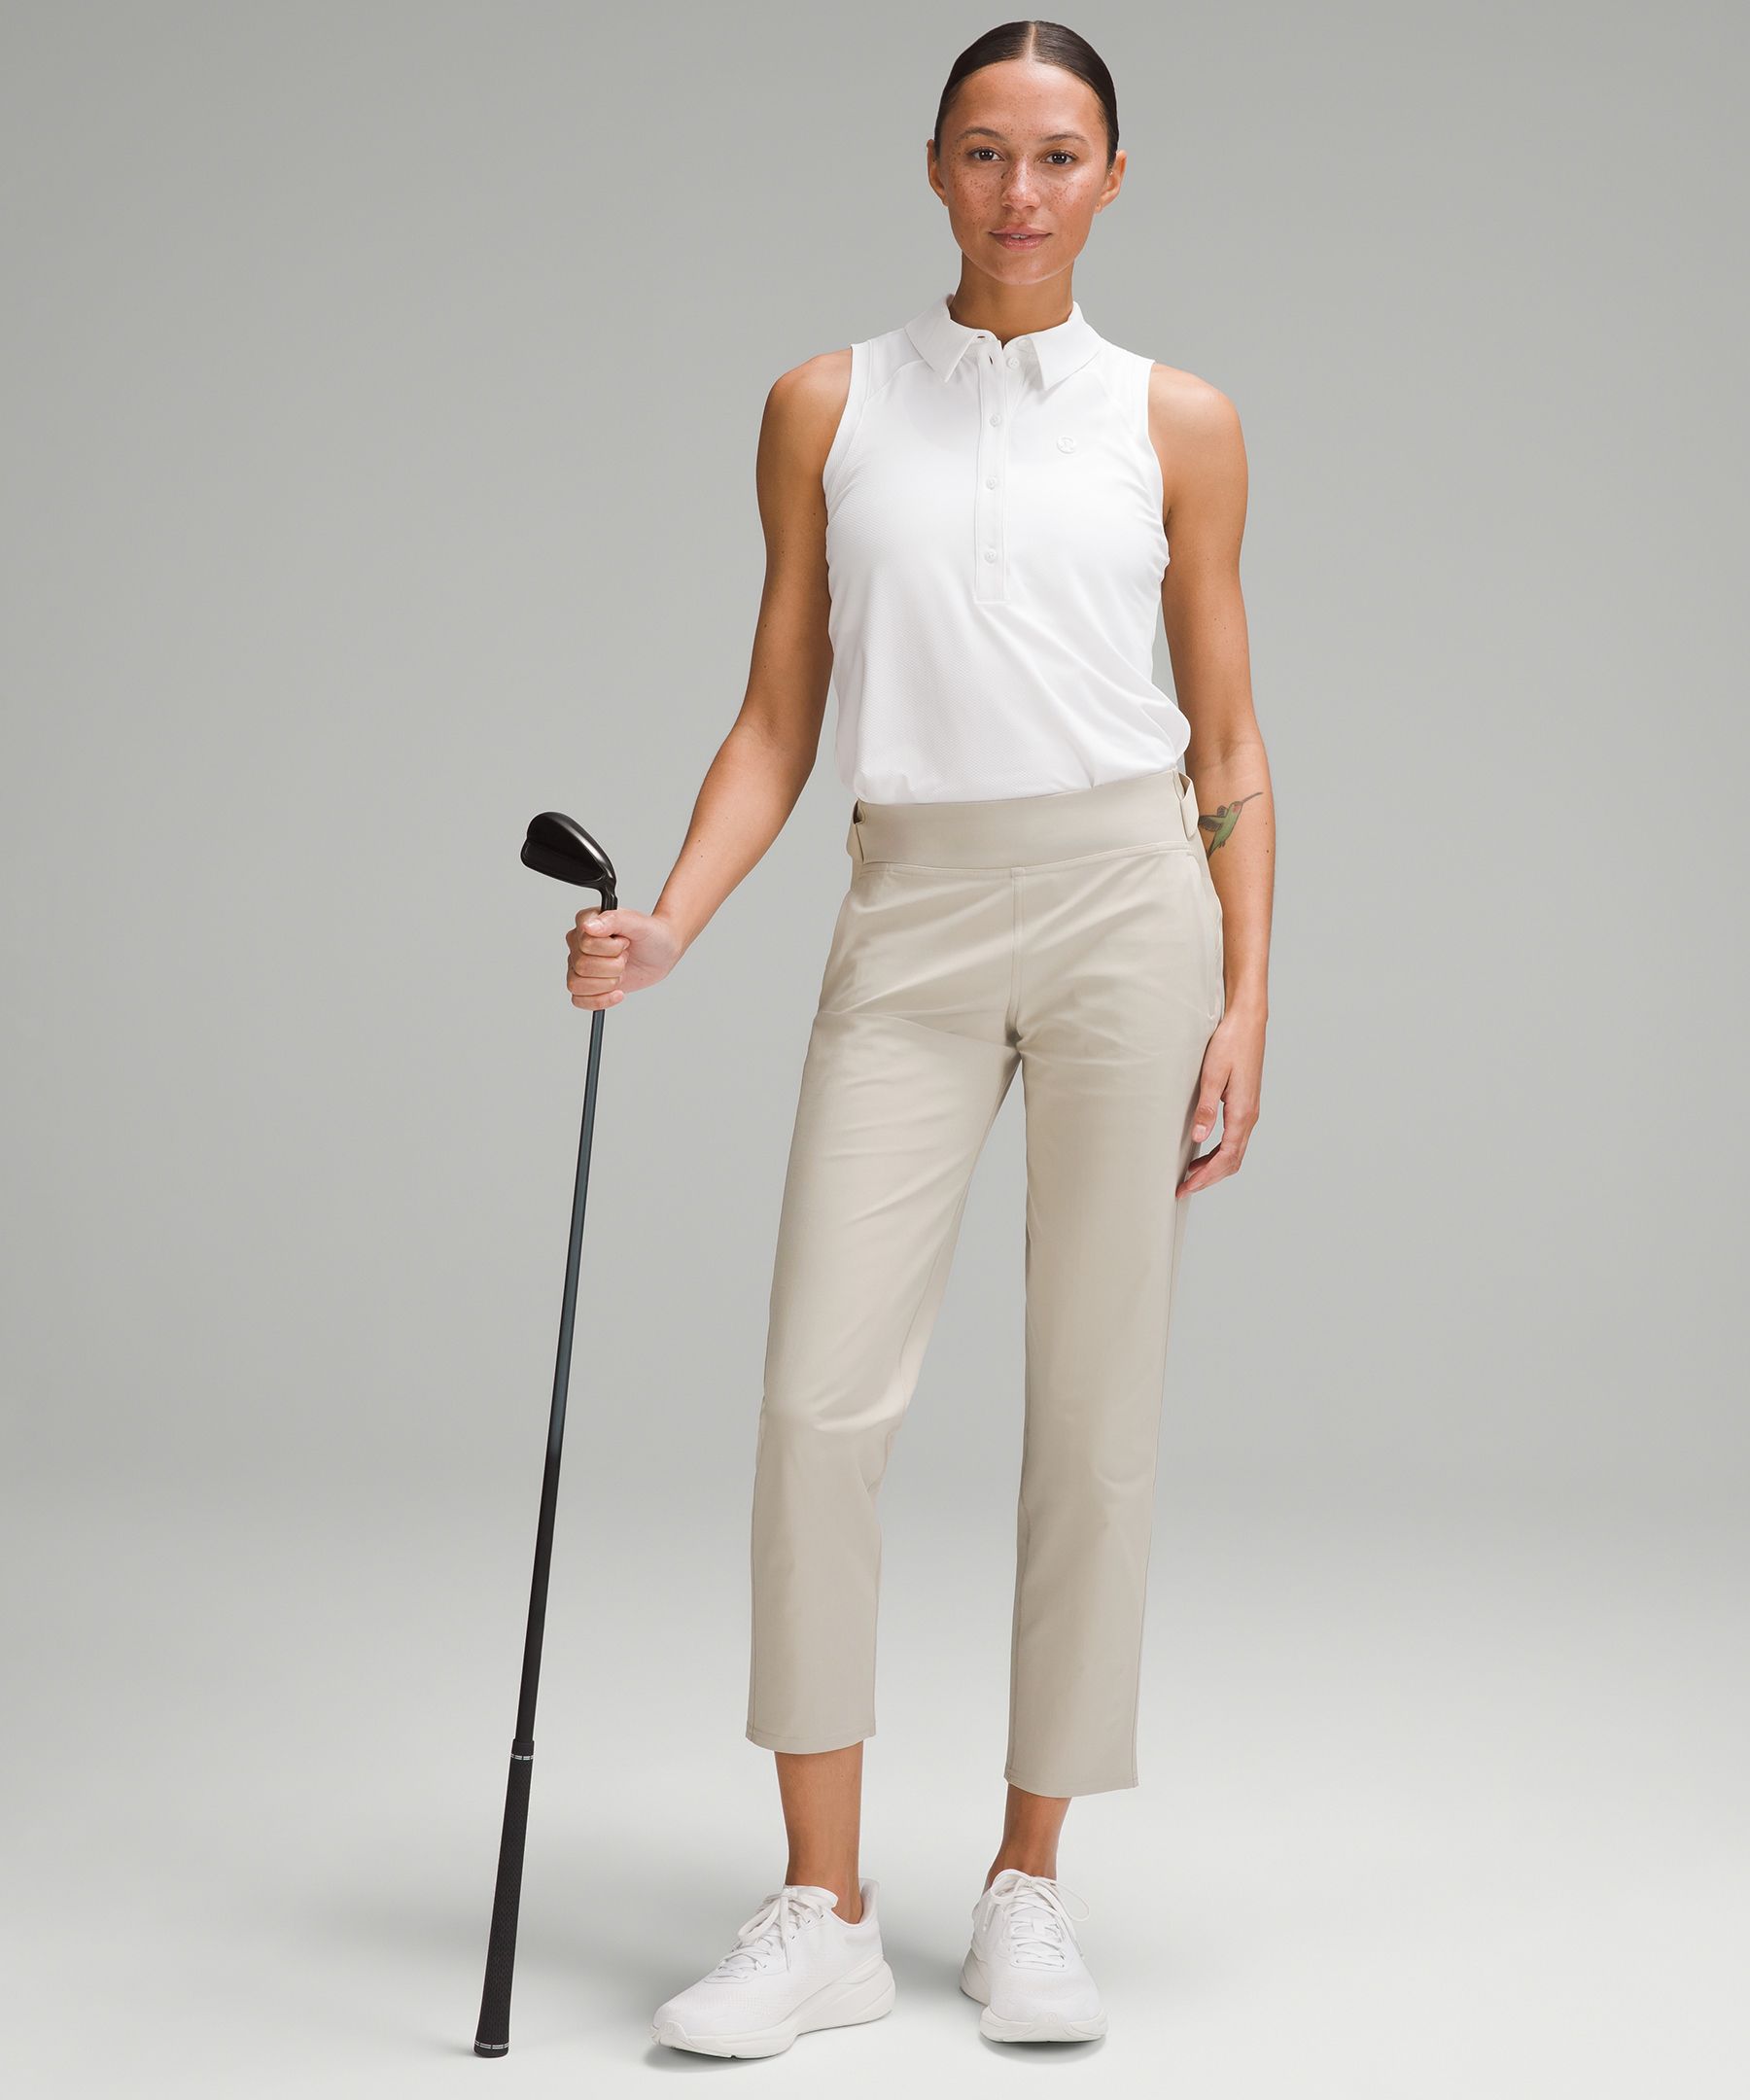 Lululemon Women's Golf Clothes  International Society of Precision  Agriculture